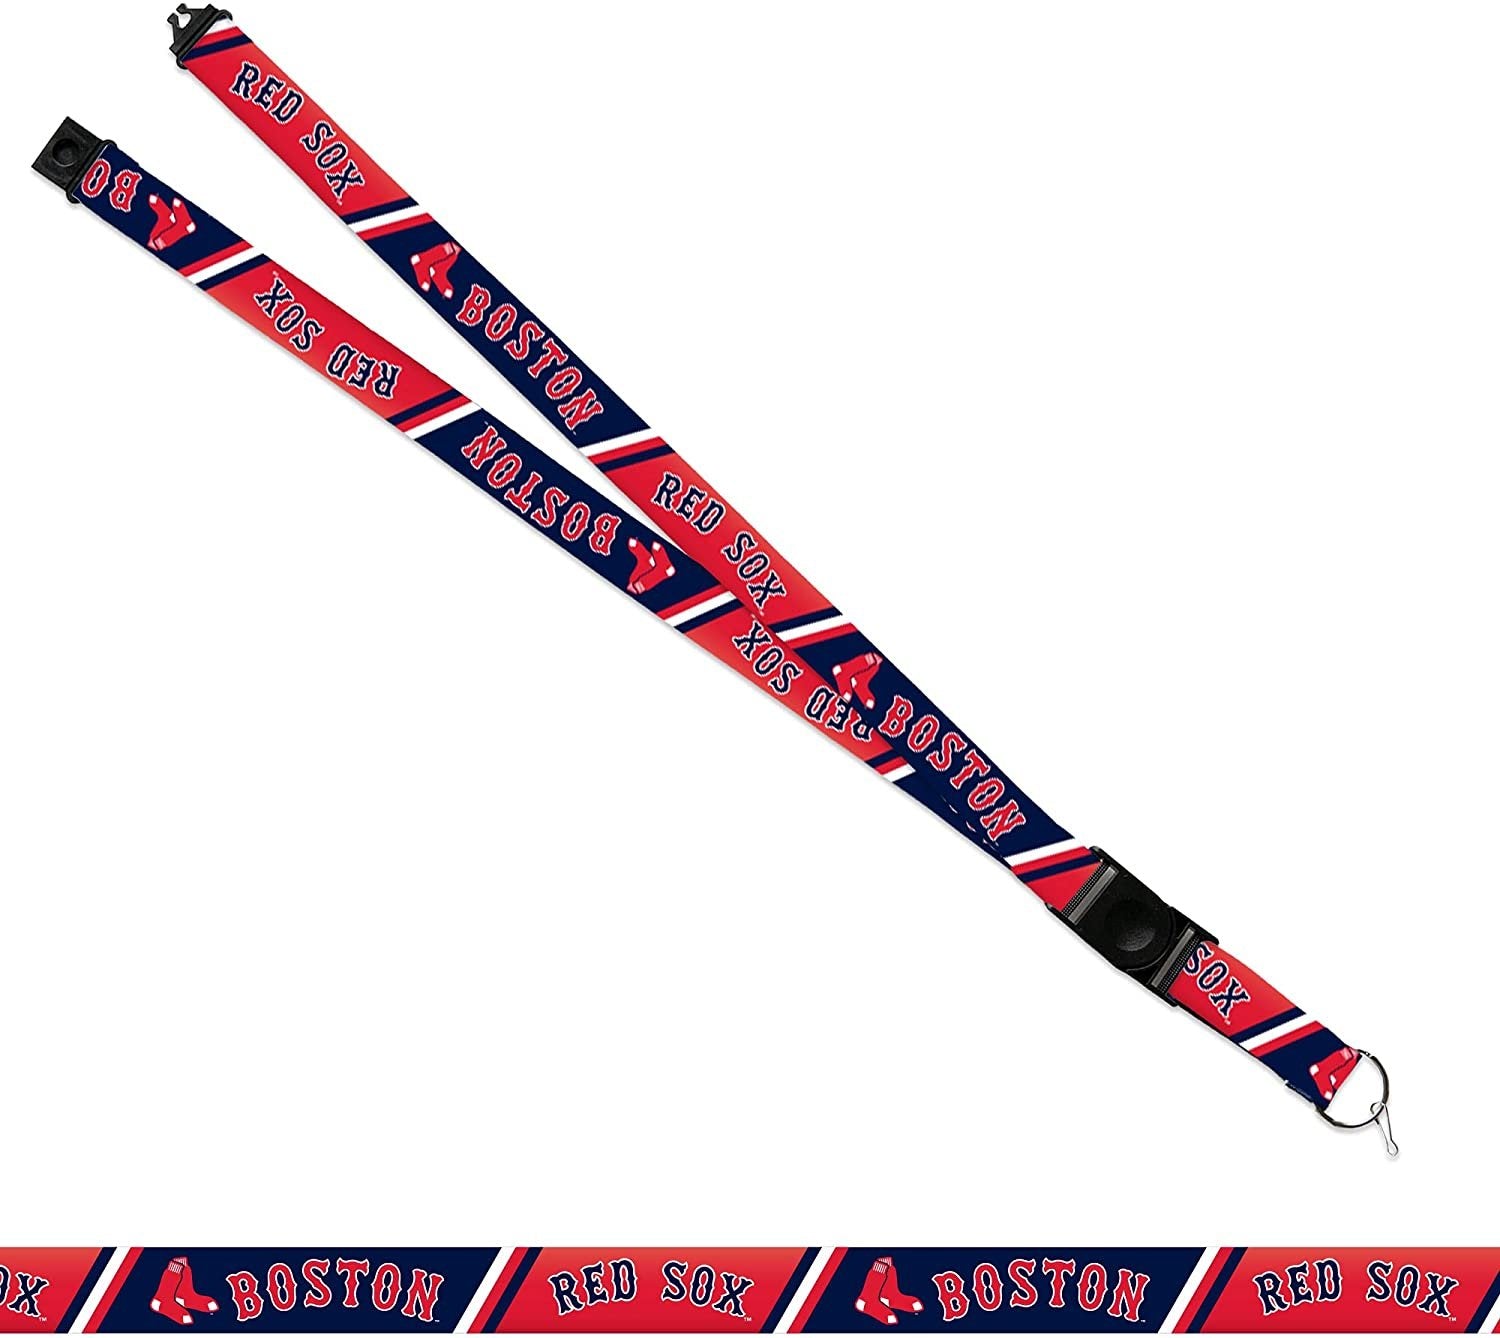 Boston Red Sox Lanyard Keychain Double Sided Breakaway Safety Design Adult 18 Inch